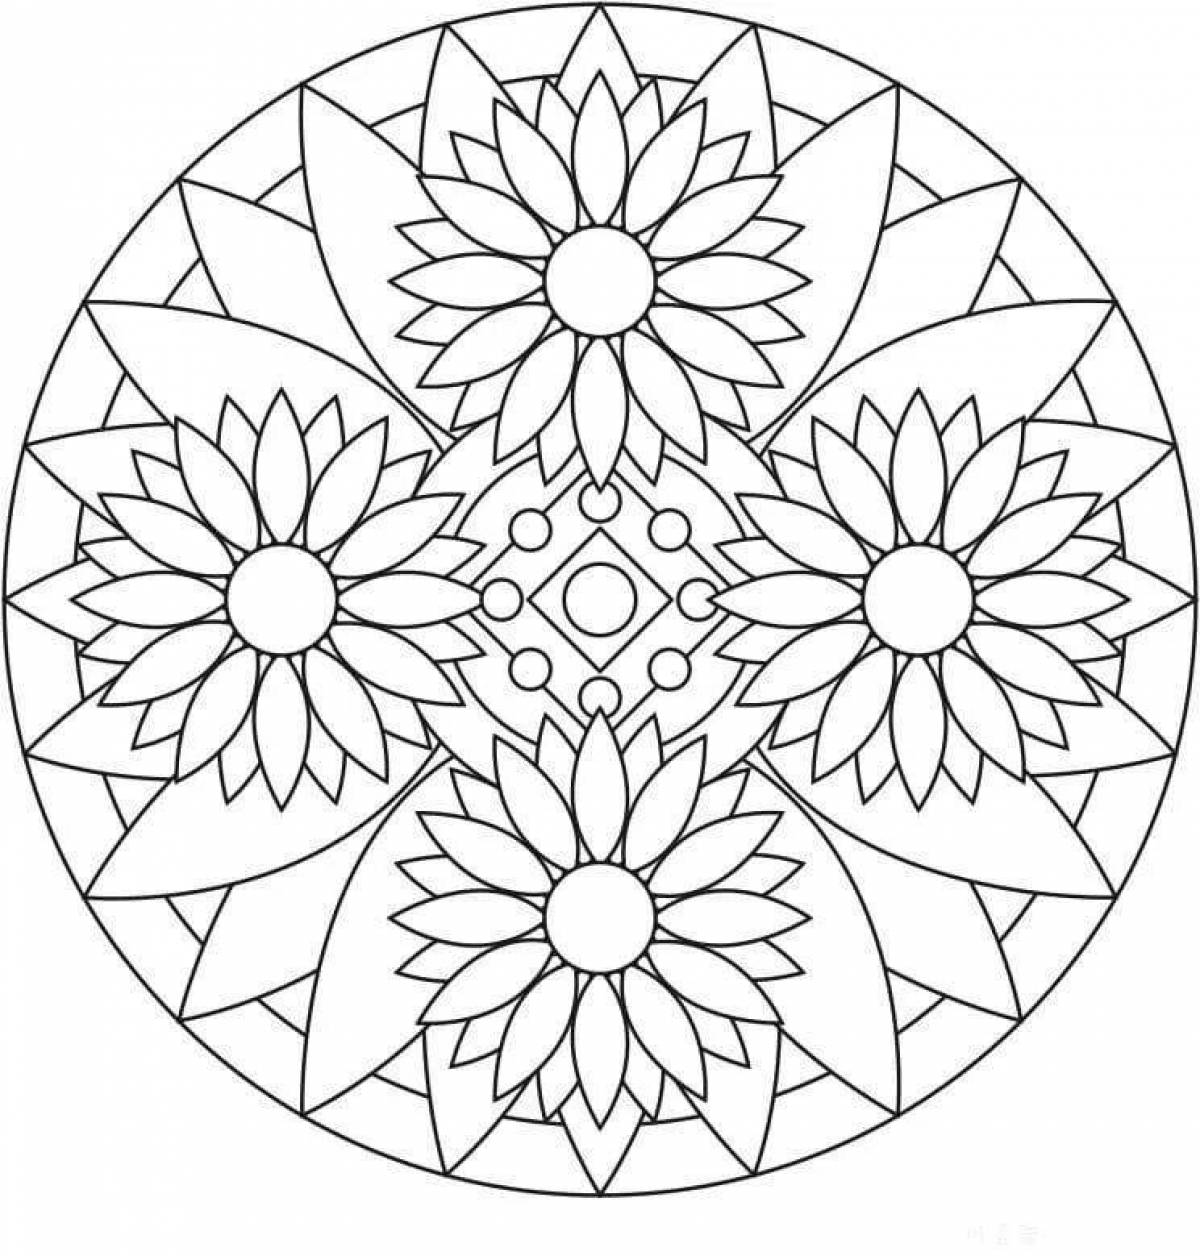 Colored coloring pages for children